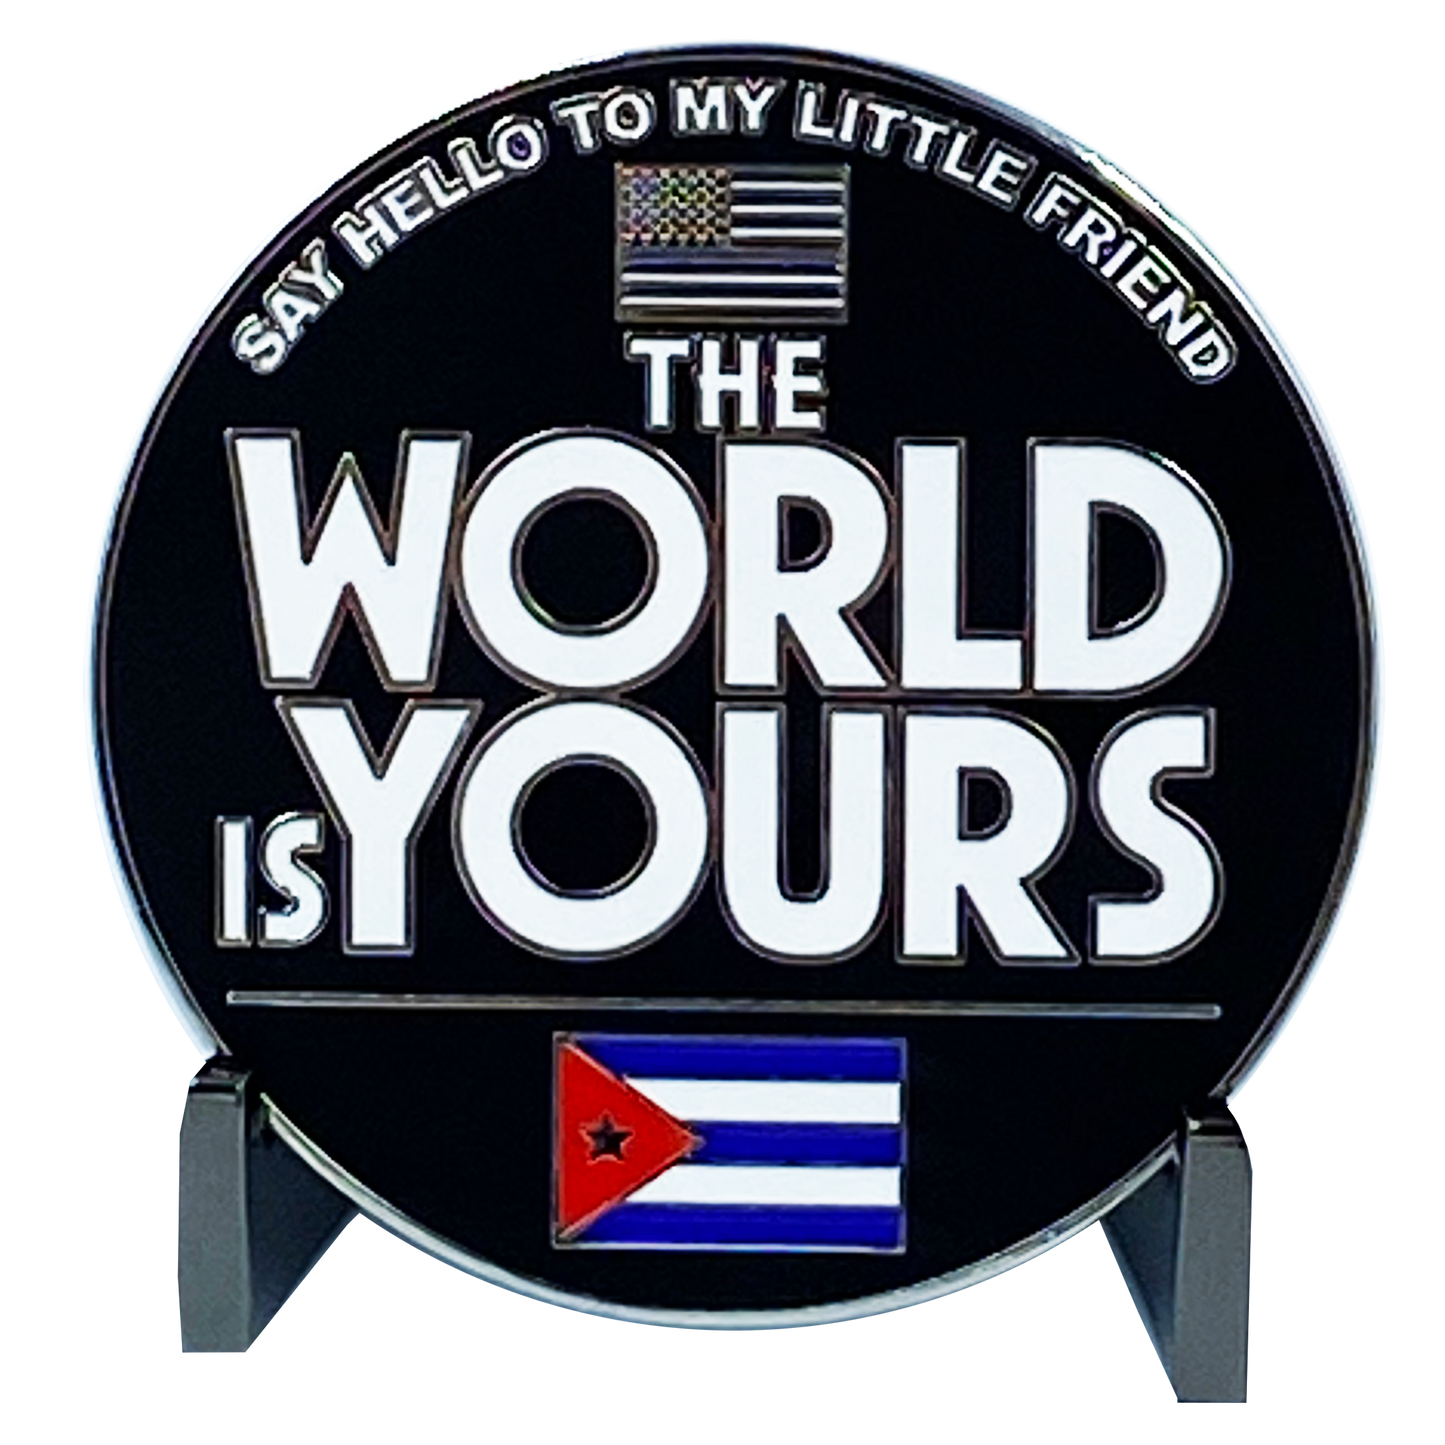 DL5-05 Scarface Money Power Respect Cuban Flag Thin Blue Line Al Pacino inspired Miami-Dade Police Challenge Coin